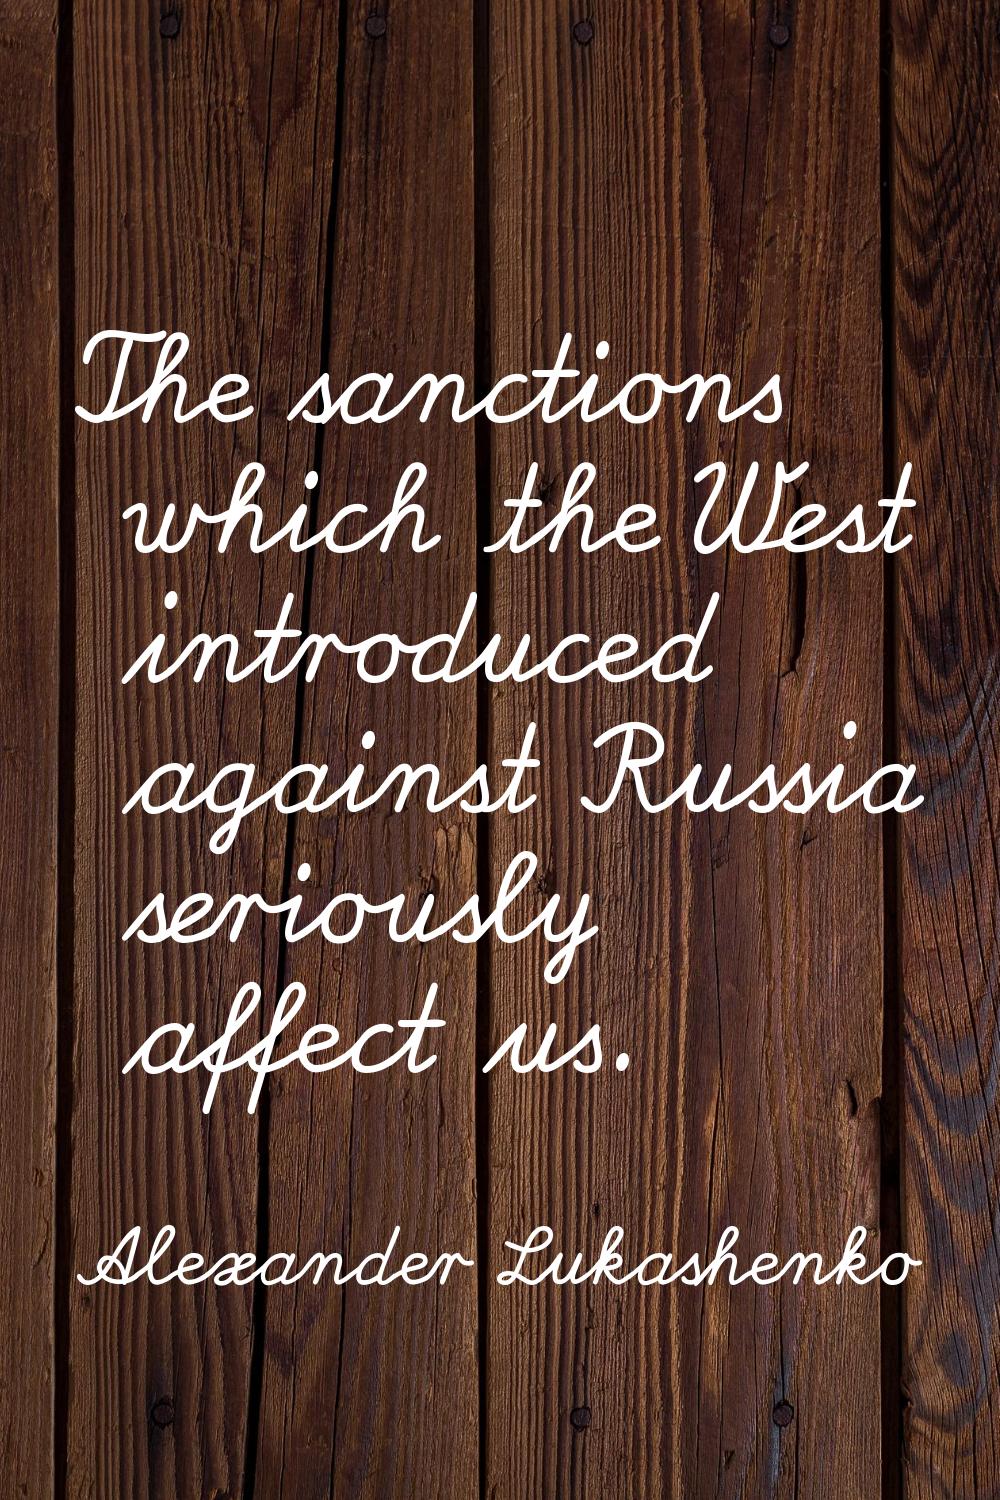 The sanctions which the West introduced against Russia seriously affect us.